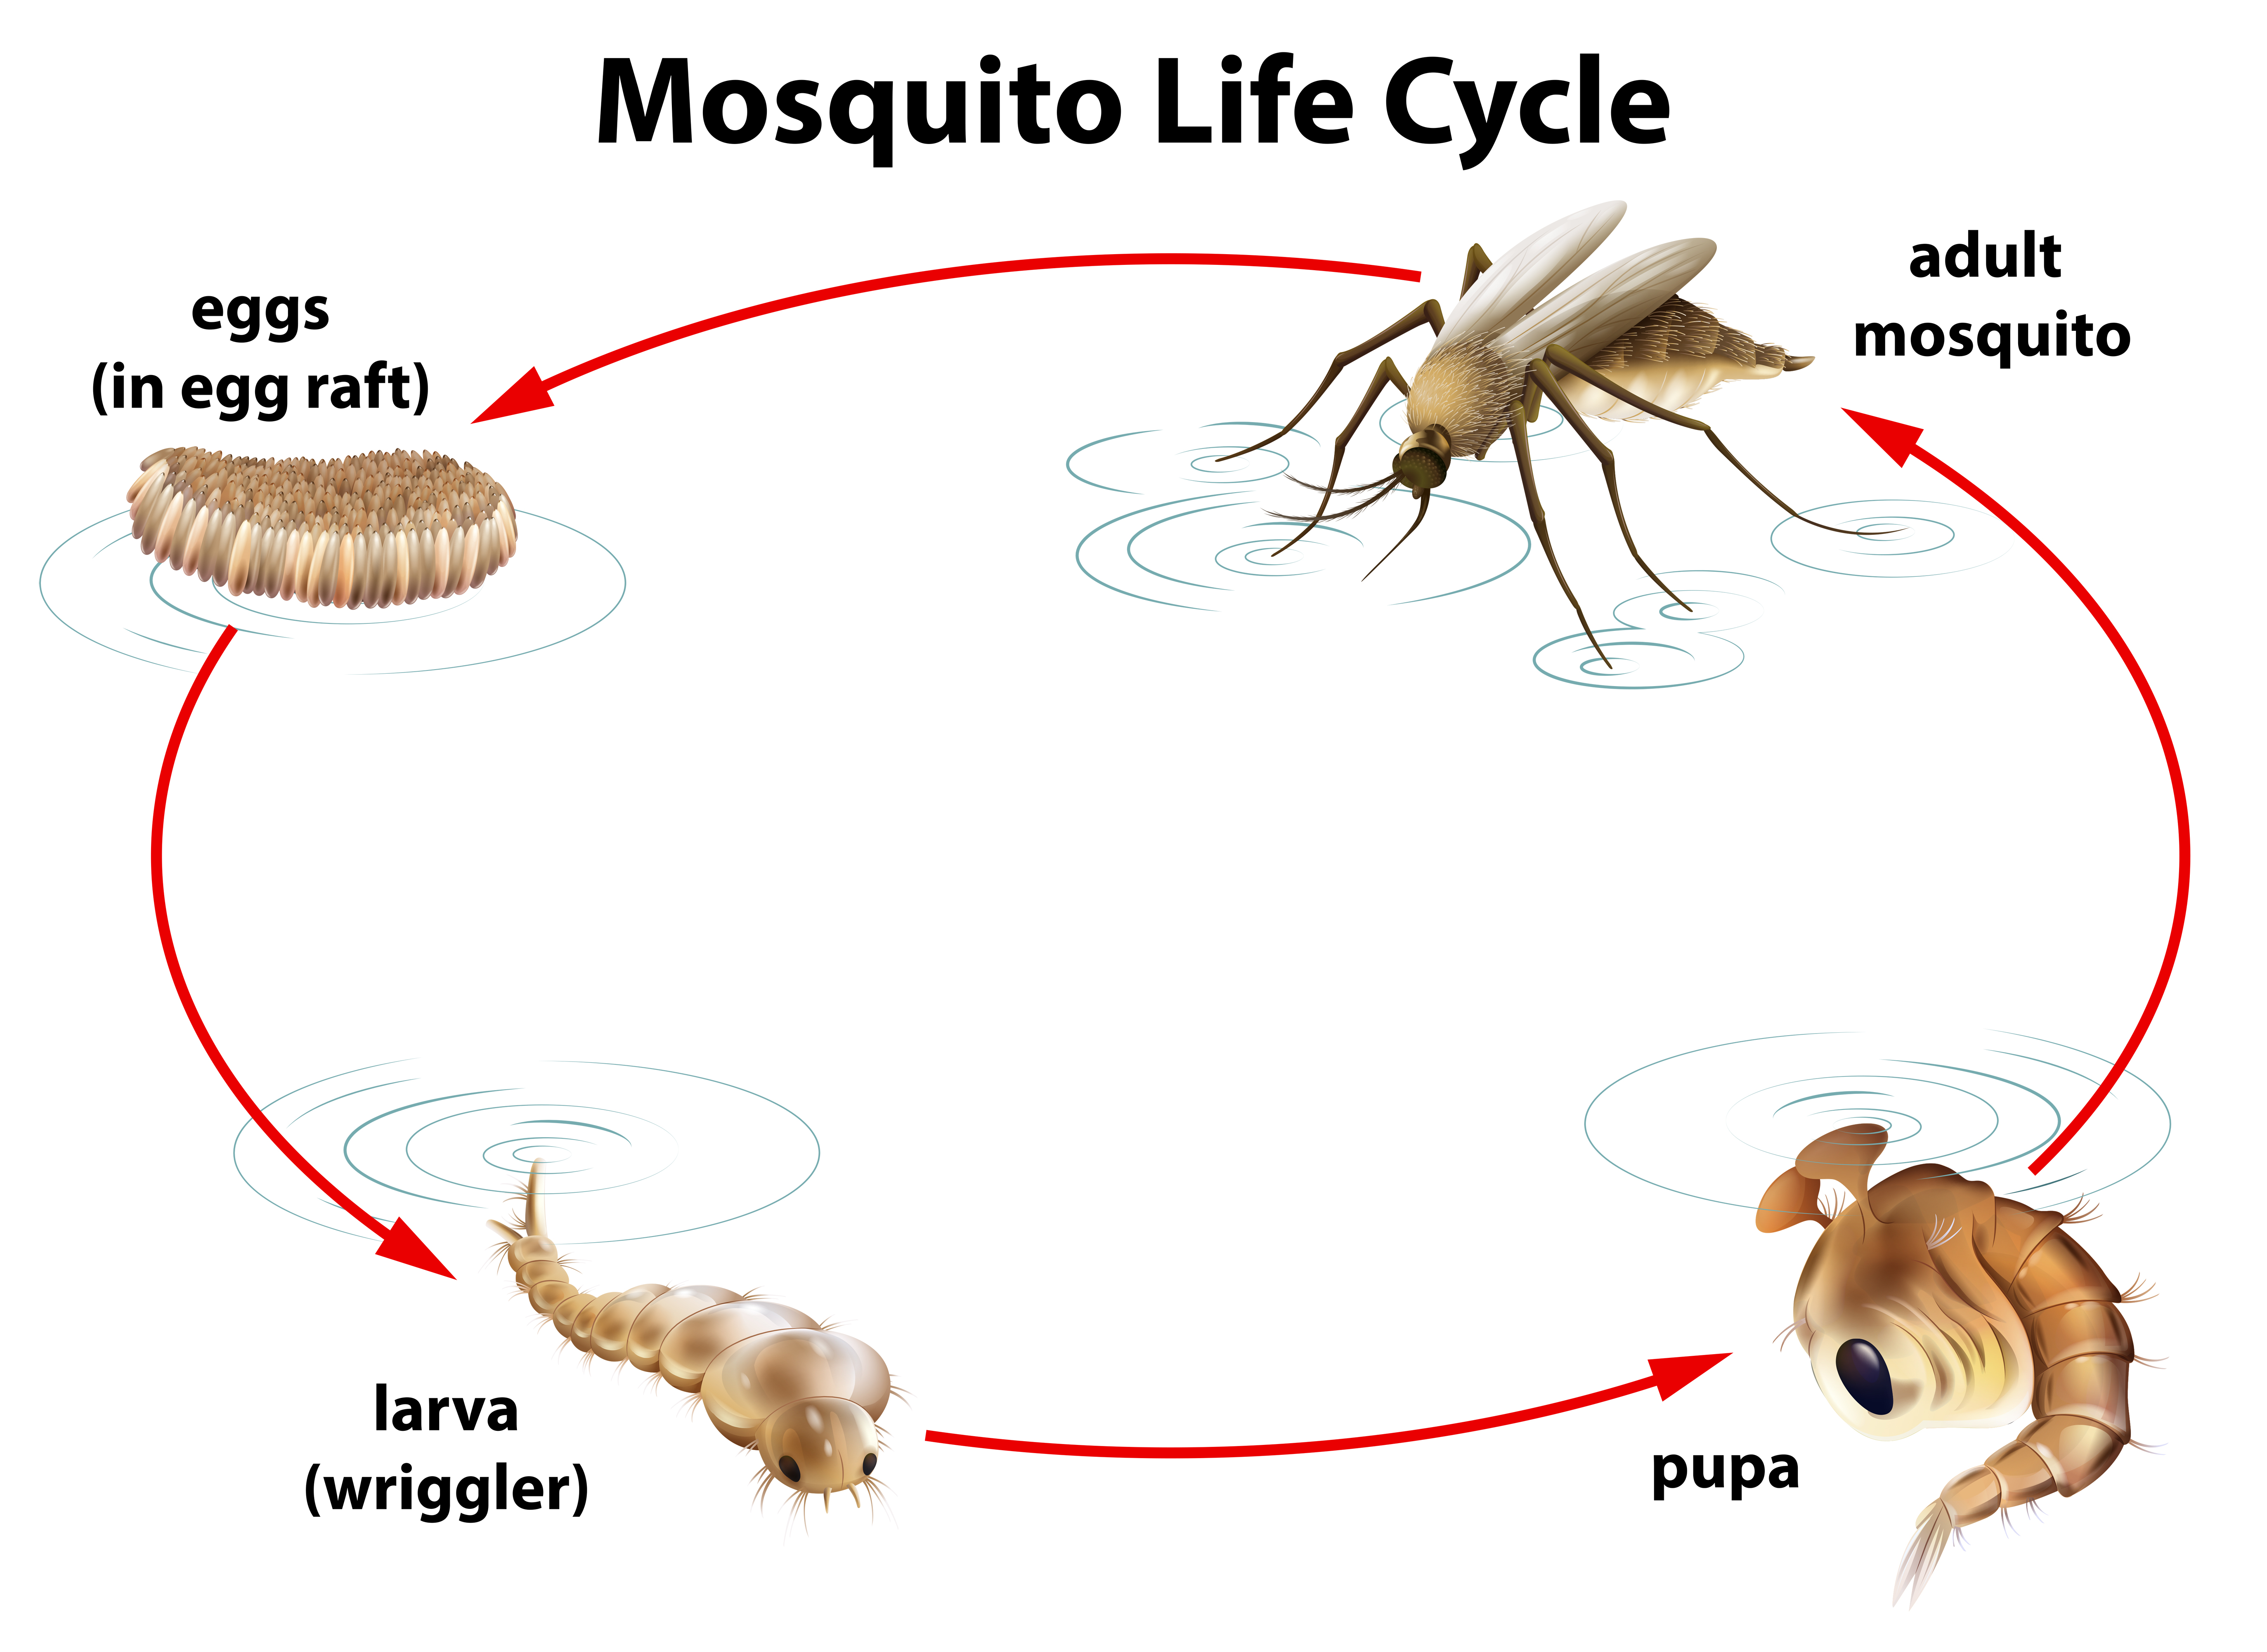 life cycle of mosquito essay